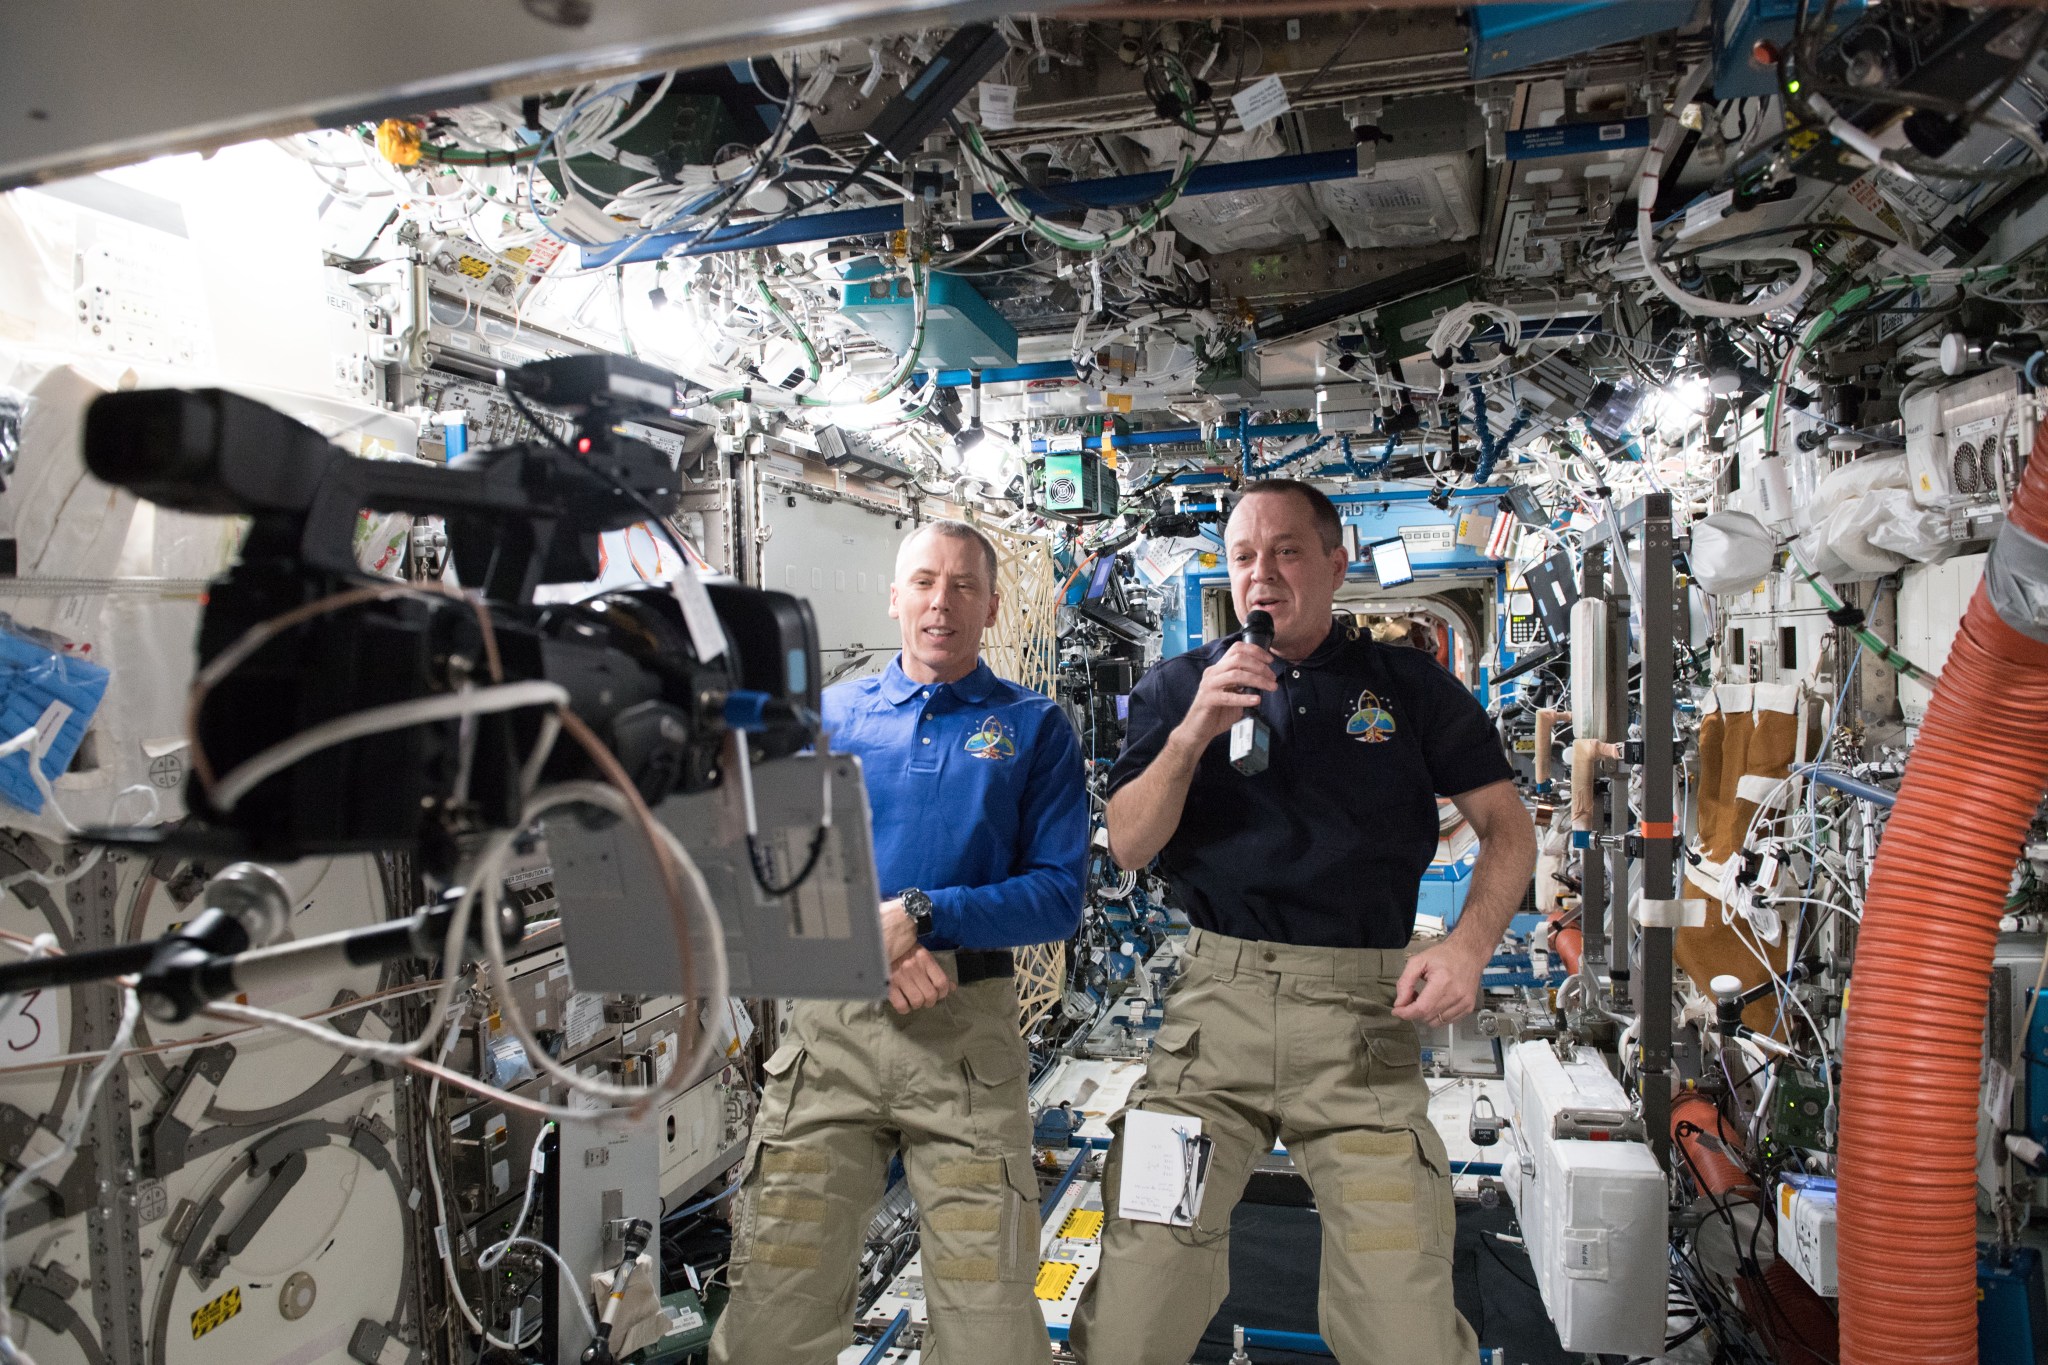 Expedition 55 astronauts Drew Feustel and Ricky Arnold will talk with students from Frostburg State University 